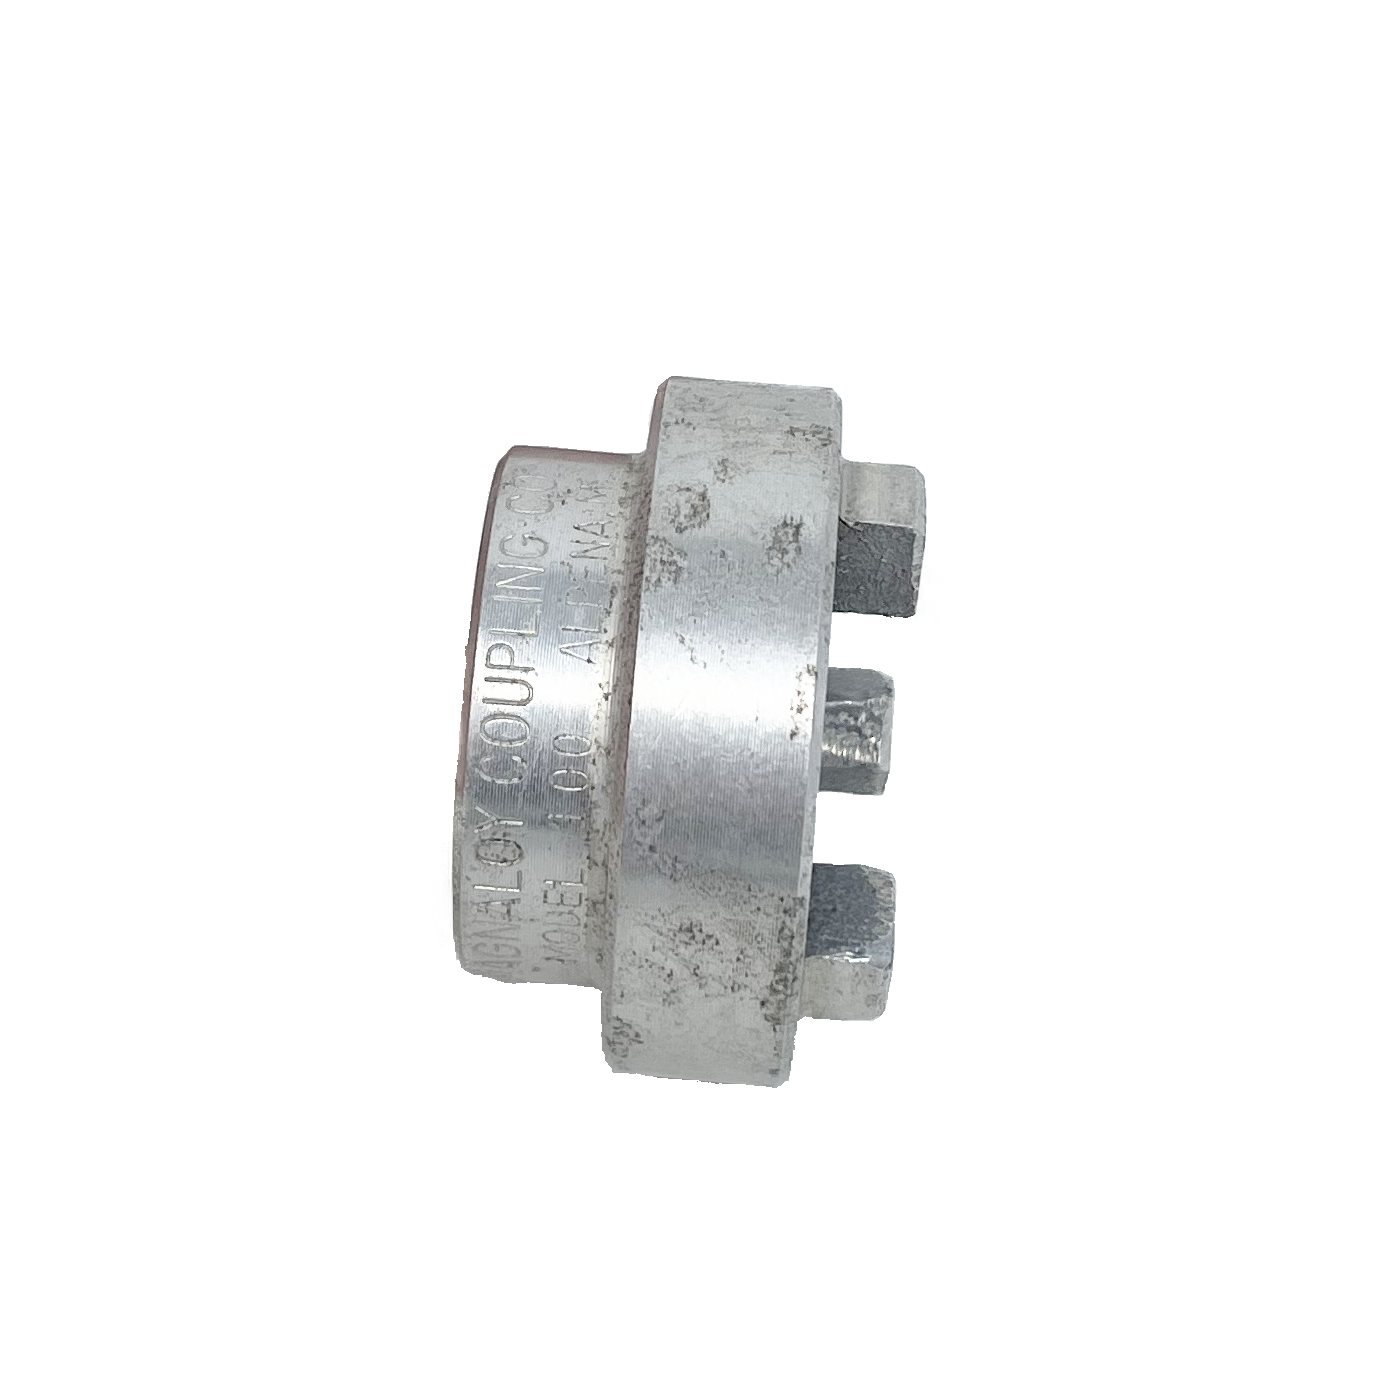 400 21T 16/32 : Magnaloy 400 HUB 21-TOOTH 16/32 SP/CLAMP, M400A2116C